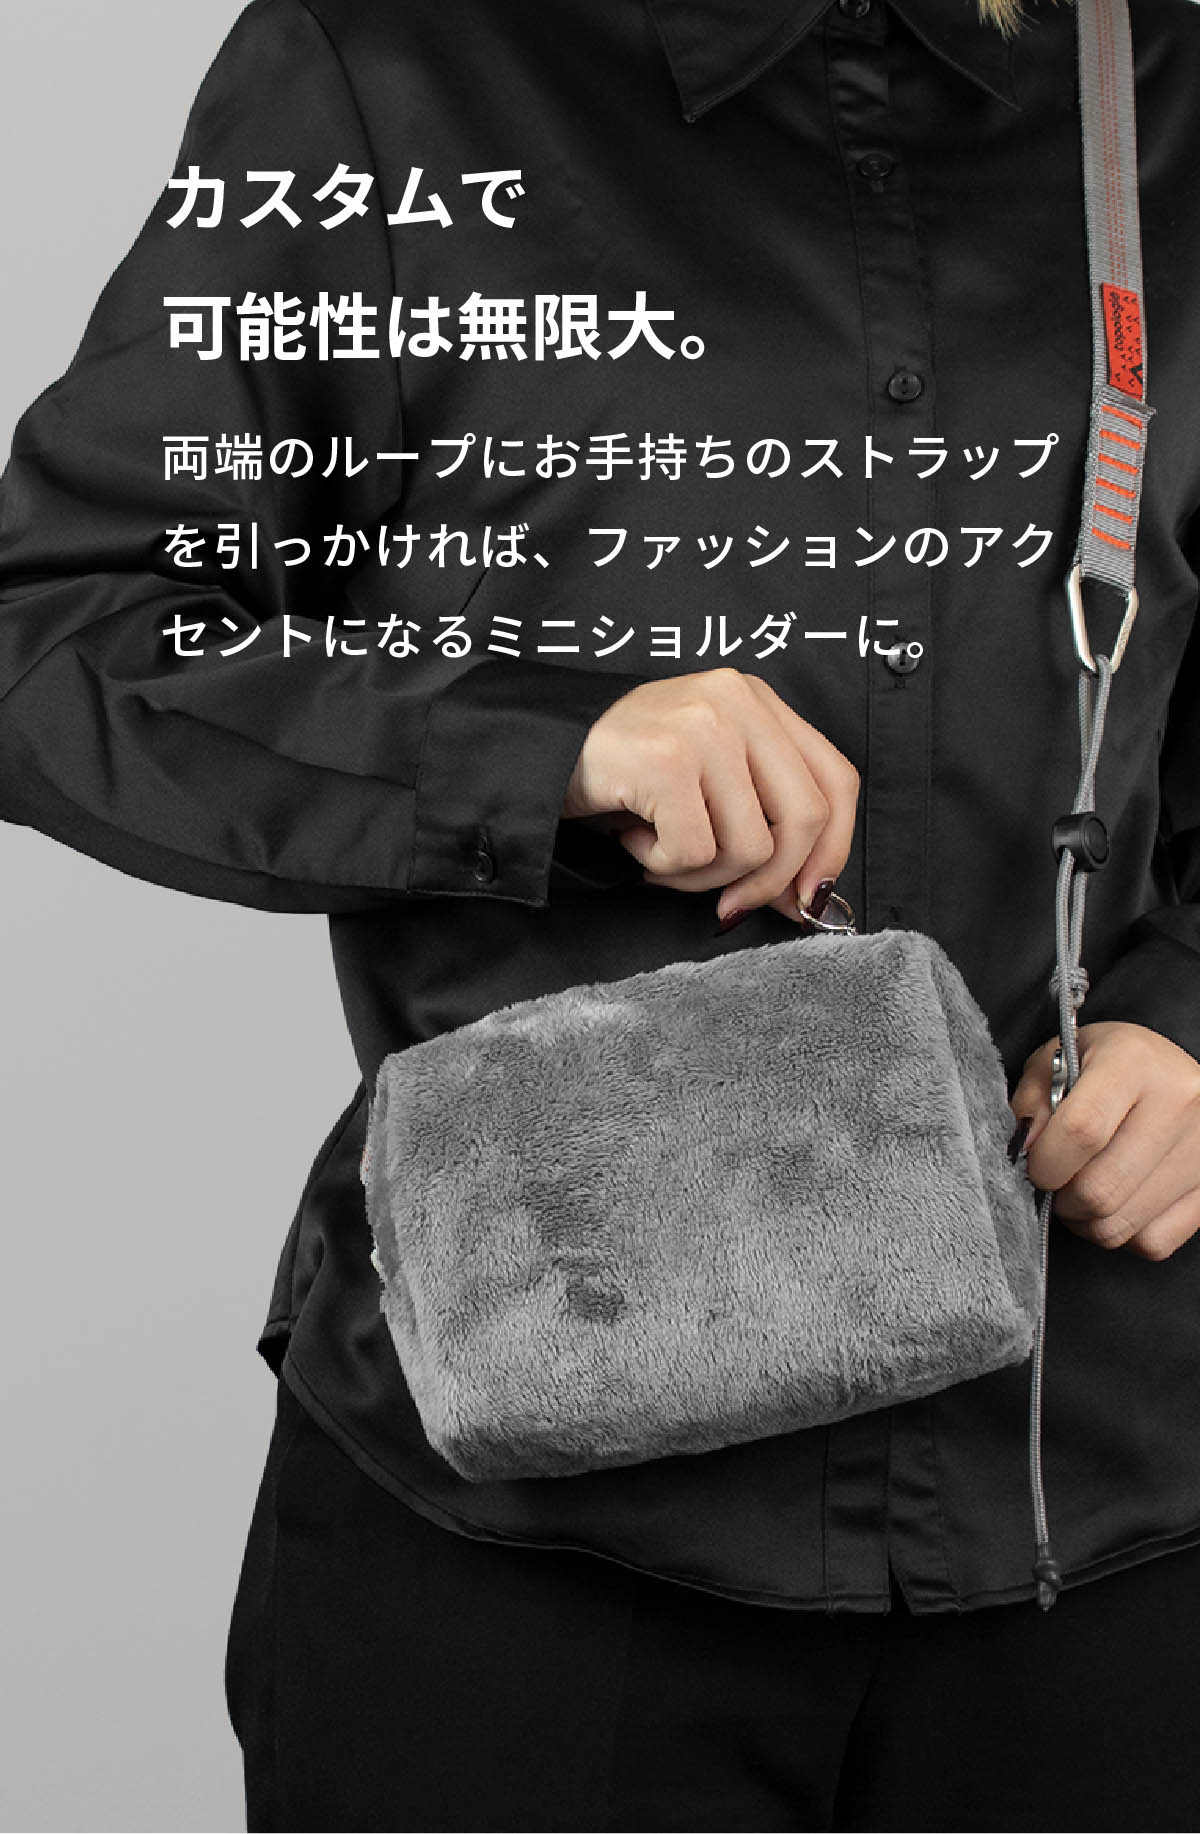 Fluff Pouch（フラッフポーチ）Lサイズ 化粧品 コスメポーチ メンズ 小物 ガジェット 送料無料 新生活 ギフト プレゼント プチギフト｜asoboze｜07